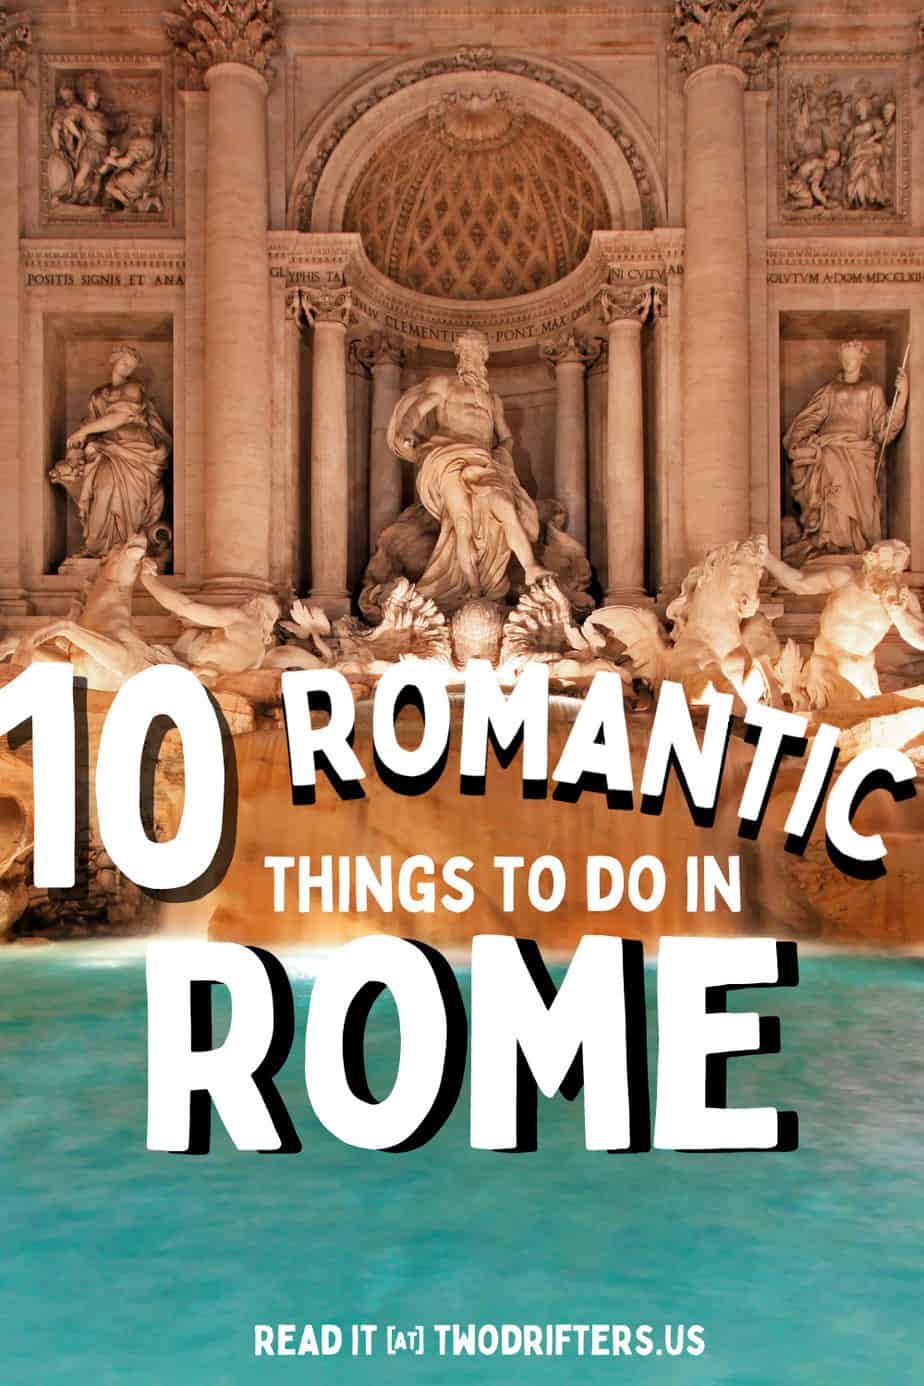 Pinterest social image that says “10 romantic things to do in Rome.”